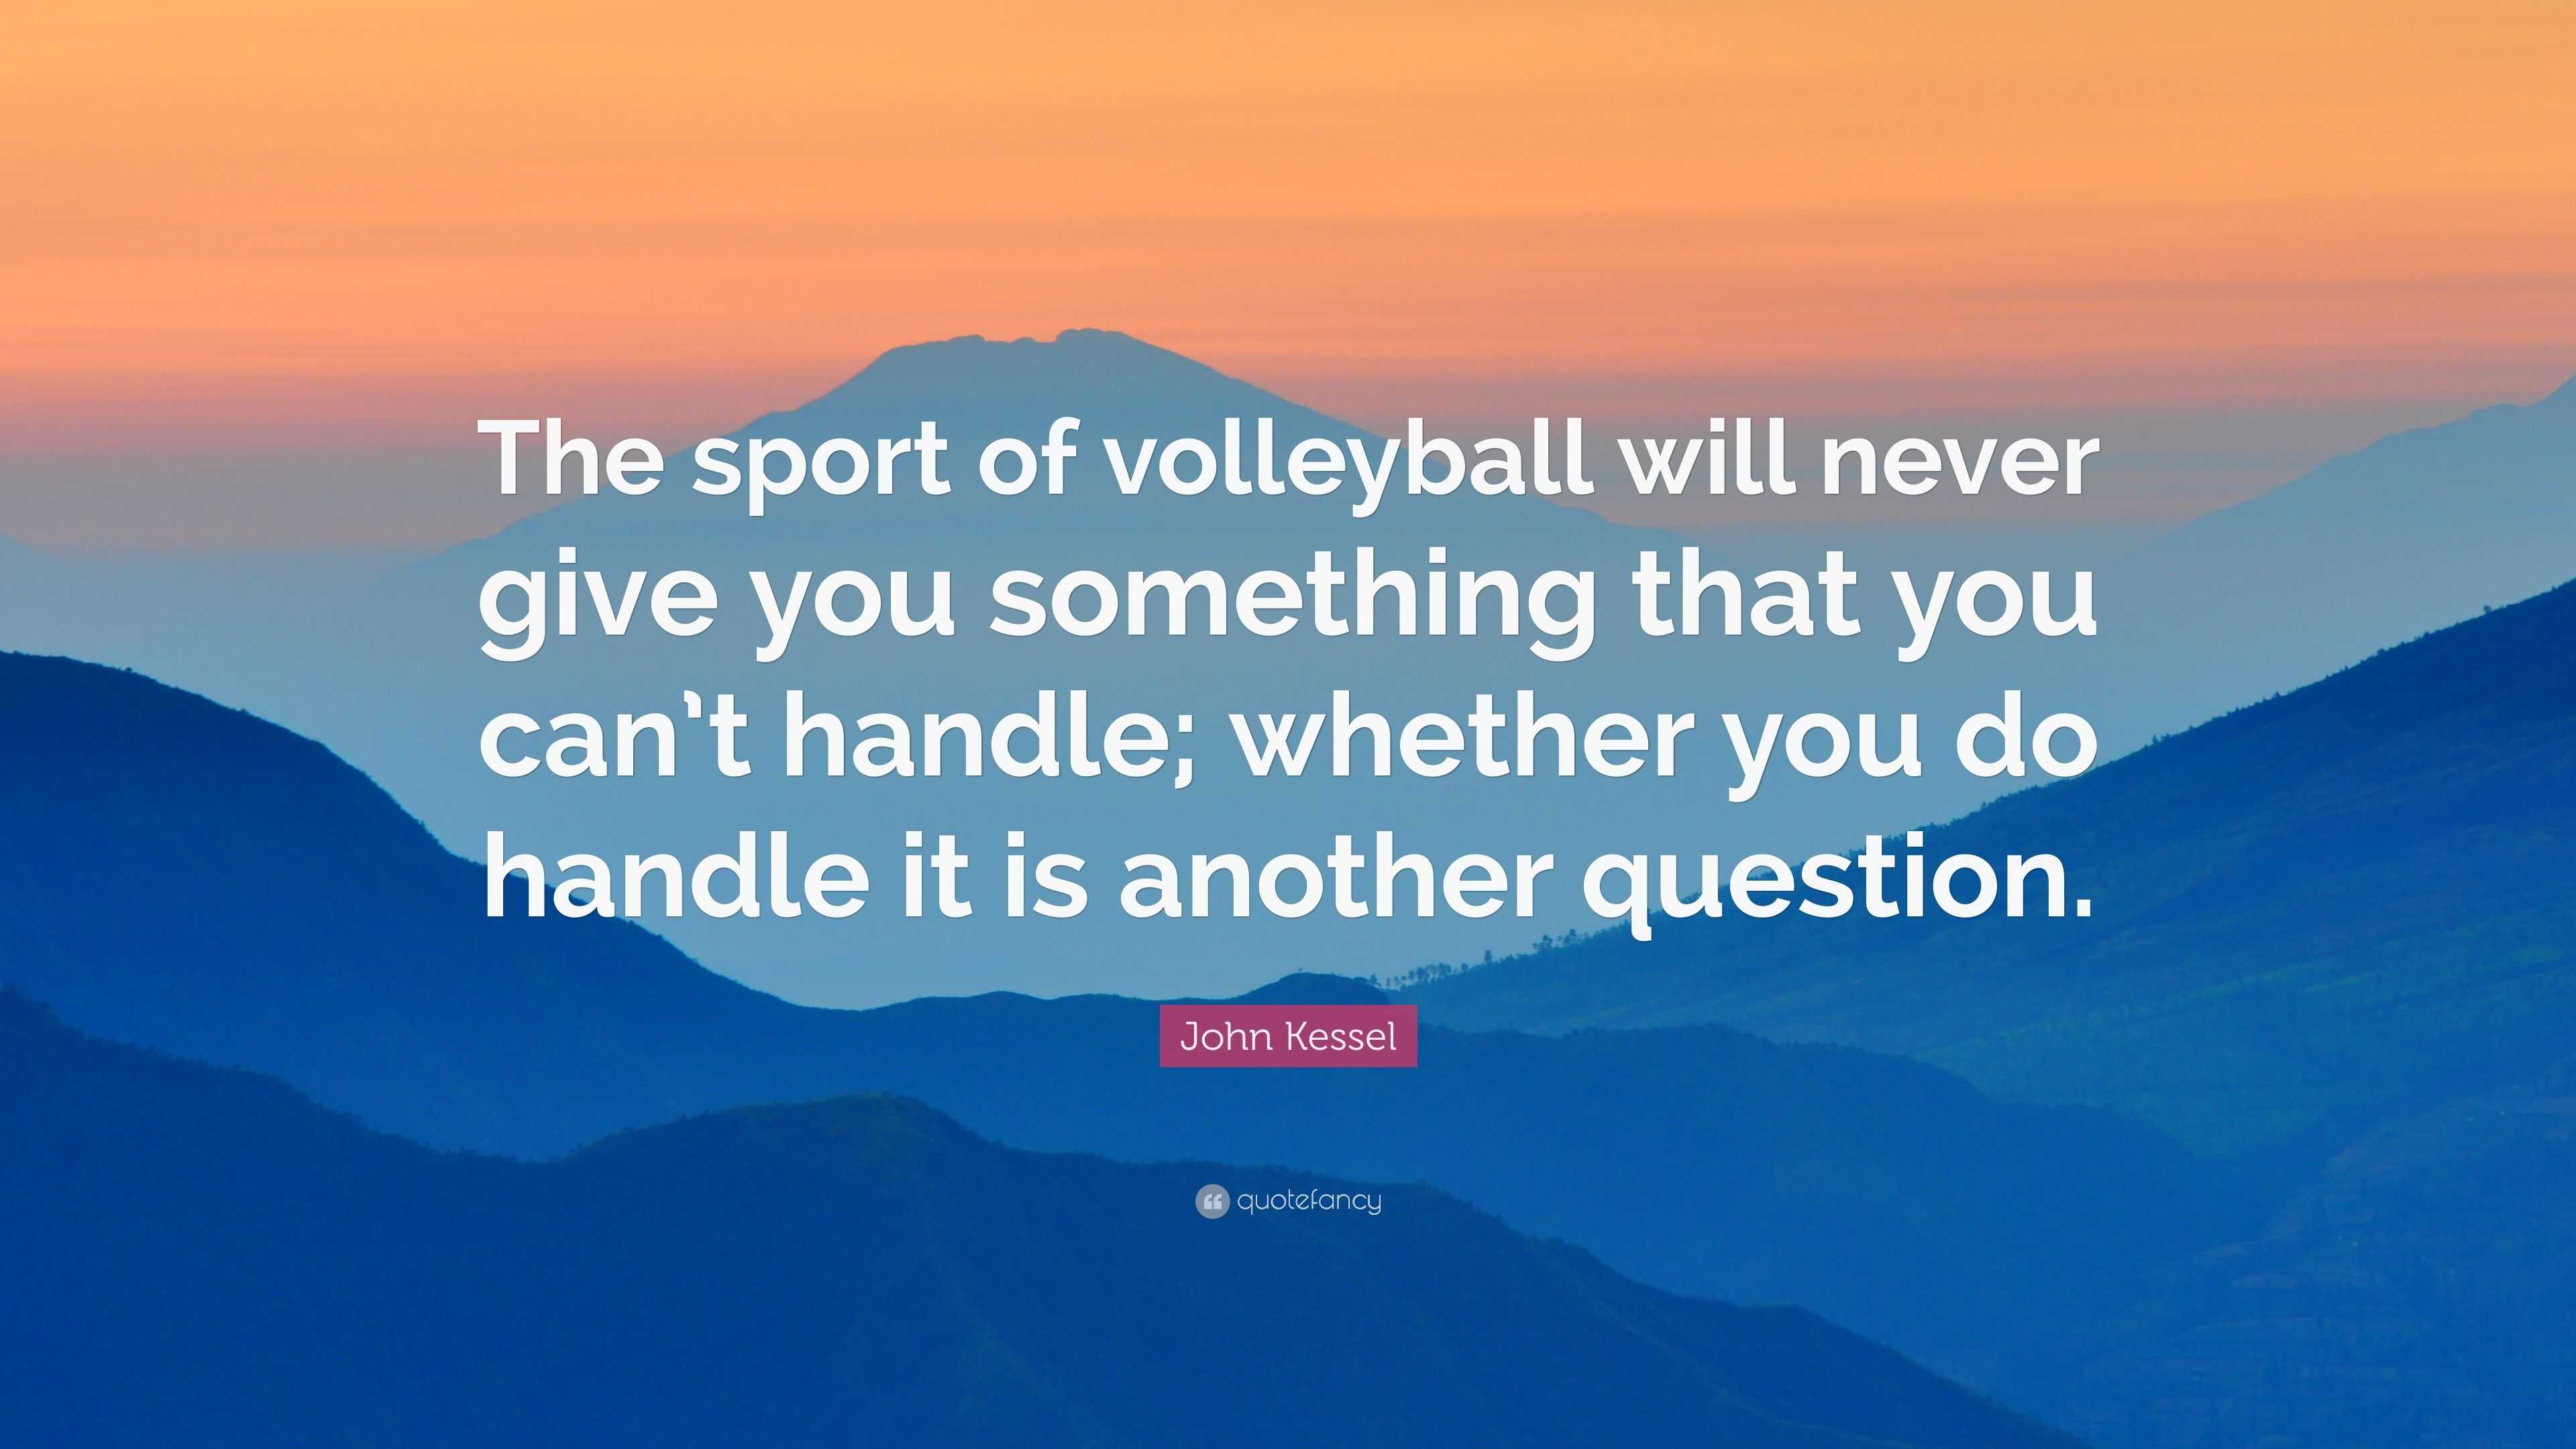 John Kessel Quote: “The sport of volleyball will never give you ...